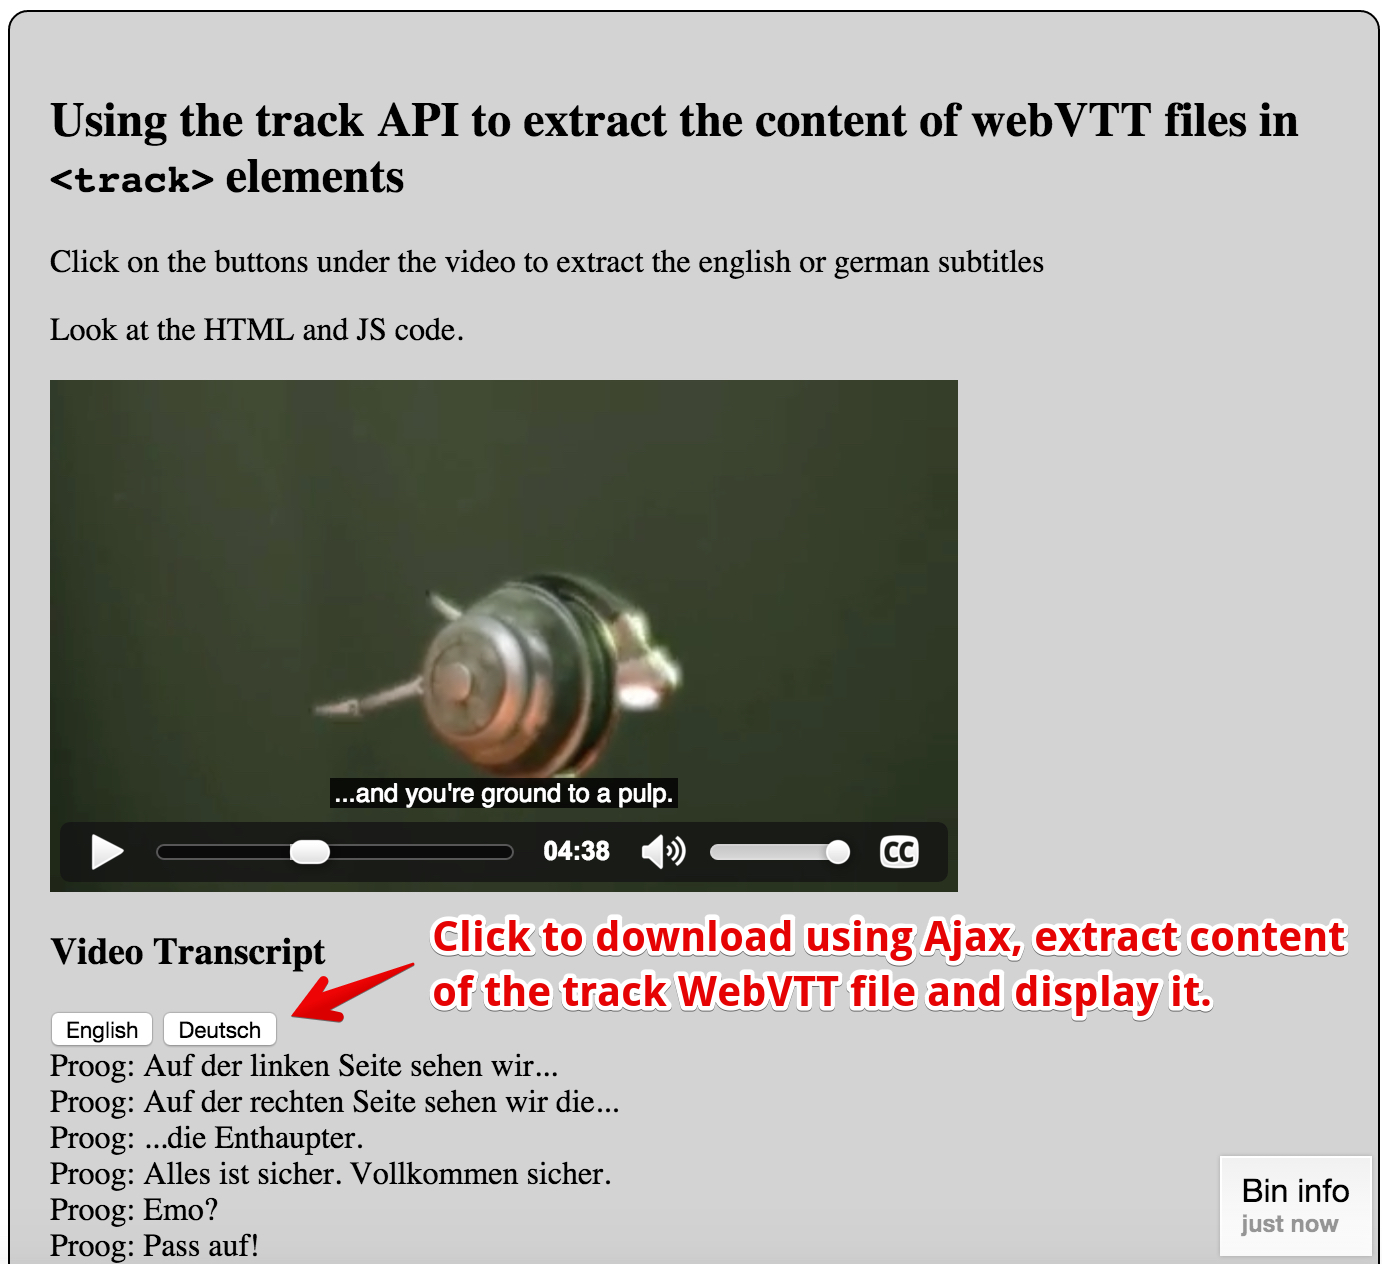 screenshot of JsBin example: video on top and two buttons "english" and "german" at bottom for extracting the track contents in english or grman